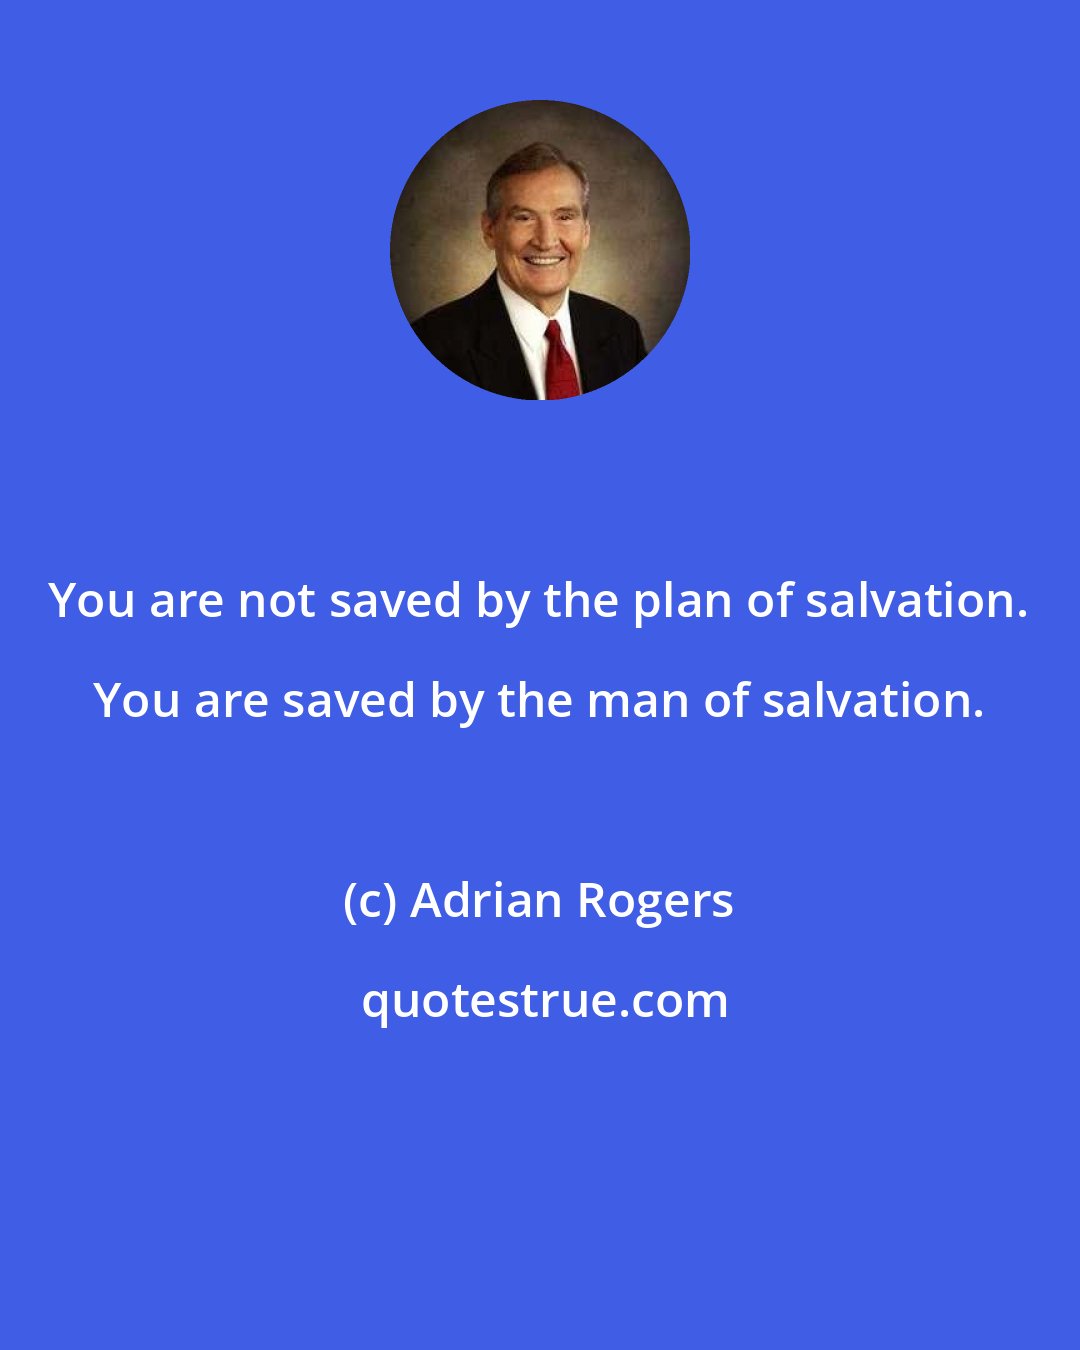 Adrian Rogers: You are not saved by the plan of salvation. You are saved by the man of salvation.